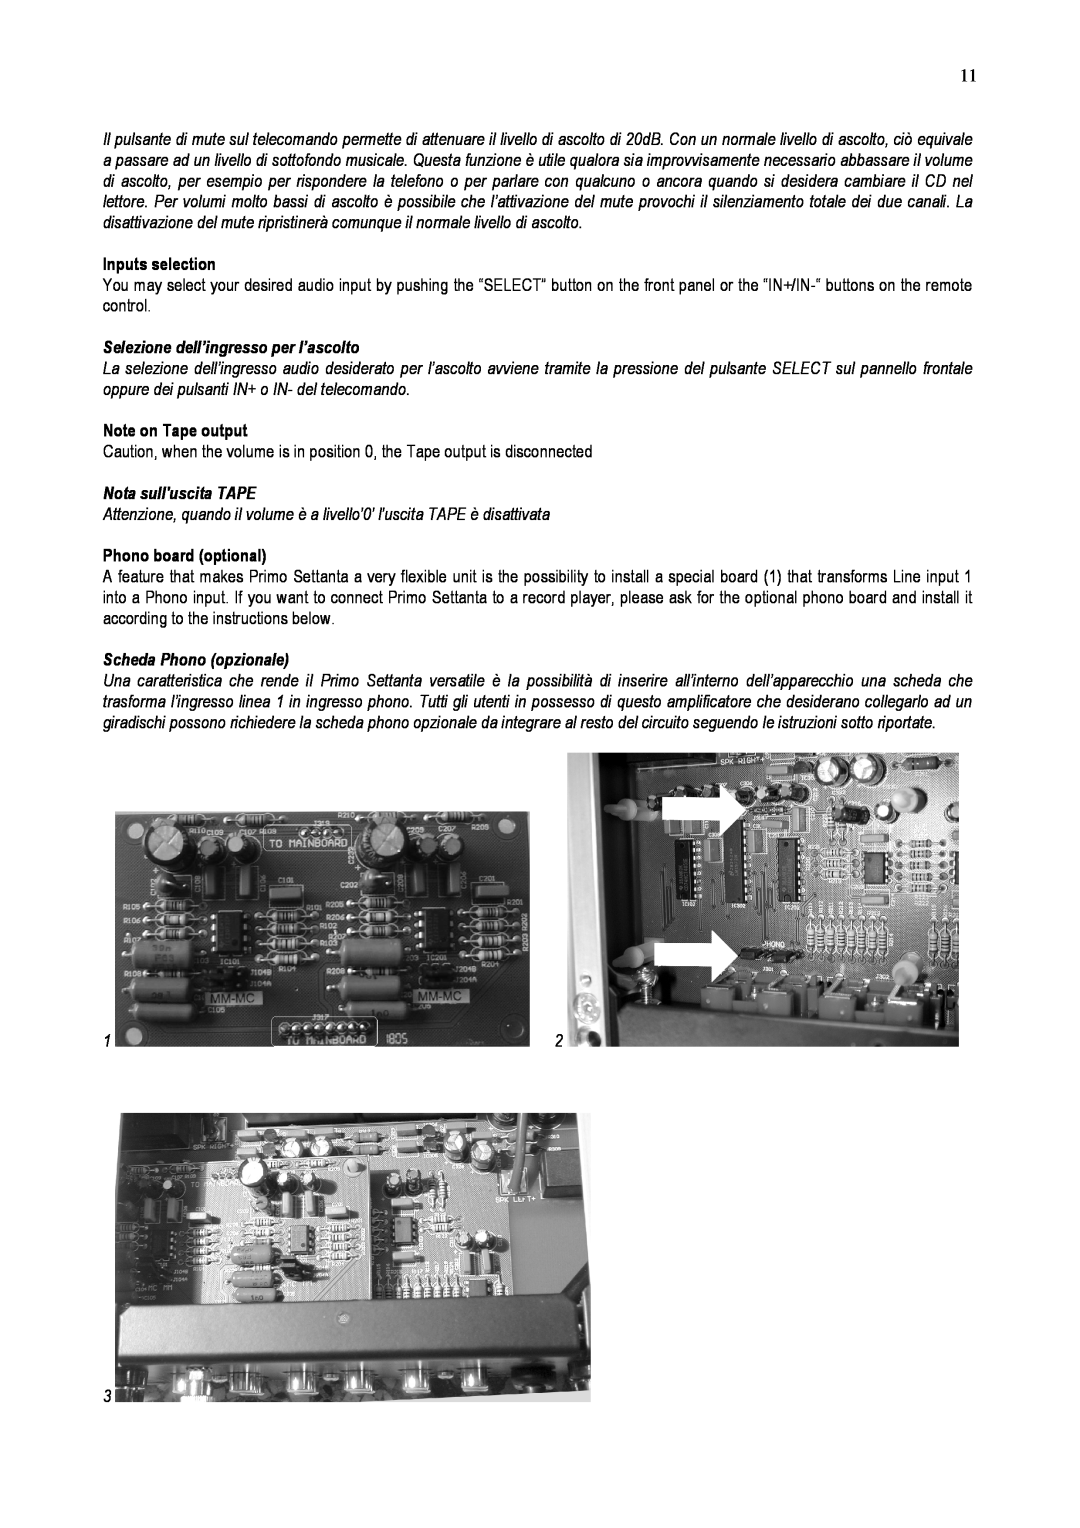 Audio Analogue SRL PRIMO owner manual Inputs selection, Selezione dell’ingresso per l’ascolto, Note on Tape output 